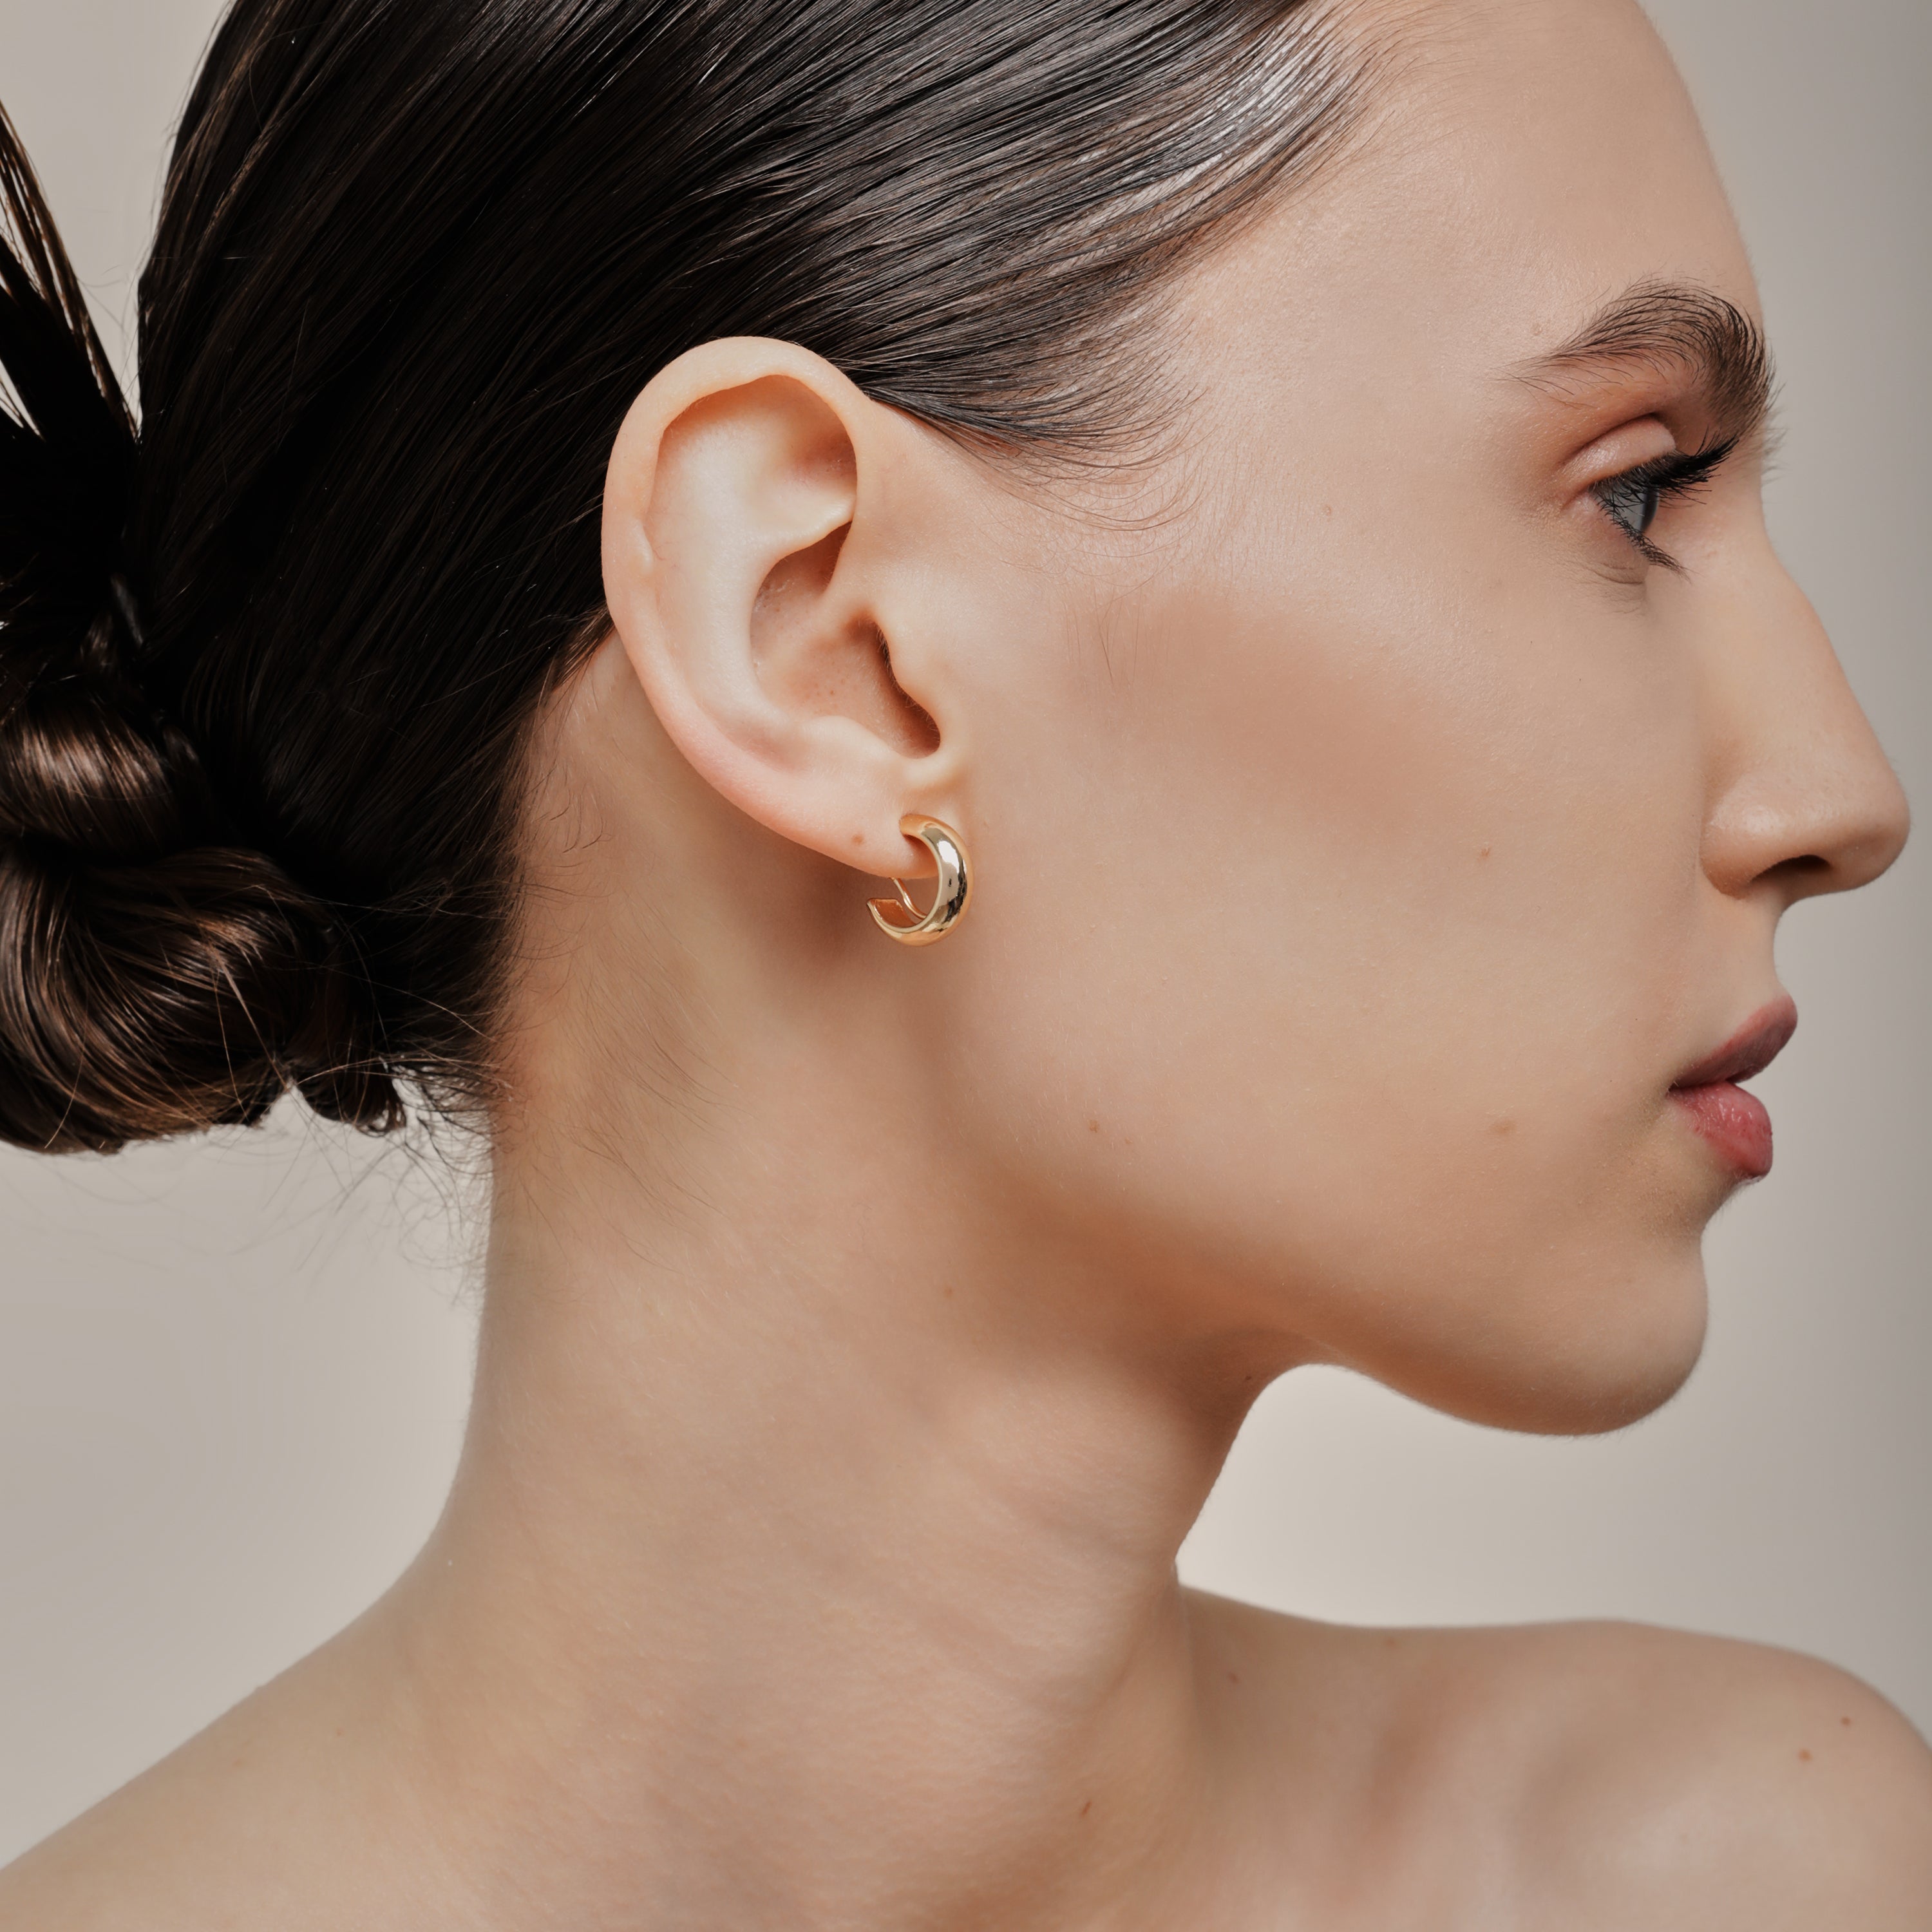 A model wearing the Simple Gold Huggie Clip-On Earrings feature a mosquito coil closure ideal for all ear types, providing a medium-secure hold and comfortable wear for up to 24 hours. These earrings can be adjusted with a gentle squeeze of the padding forward once on the ear. Crafted with Gold tone plated copper alloy, these sophisticated earrings are also available in Silver.